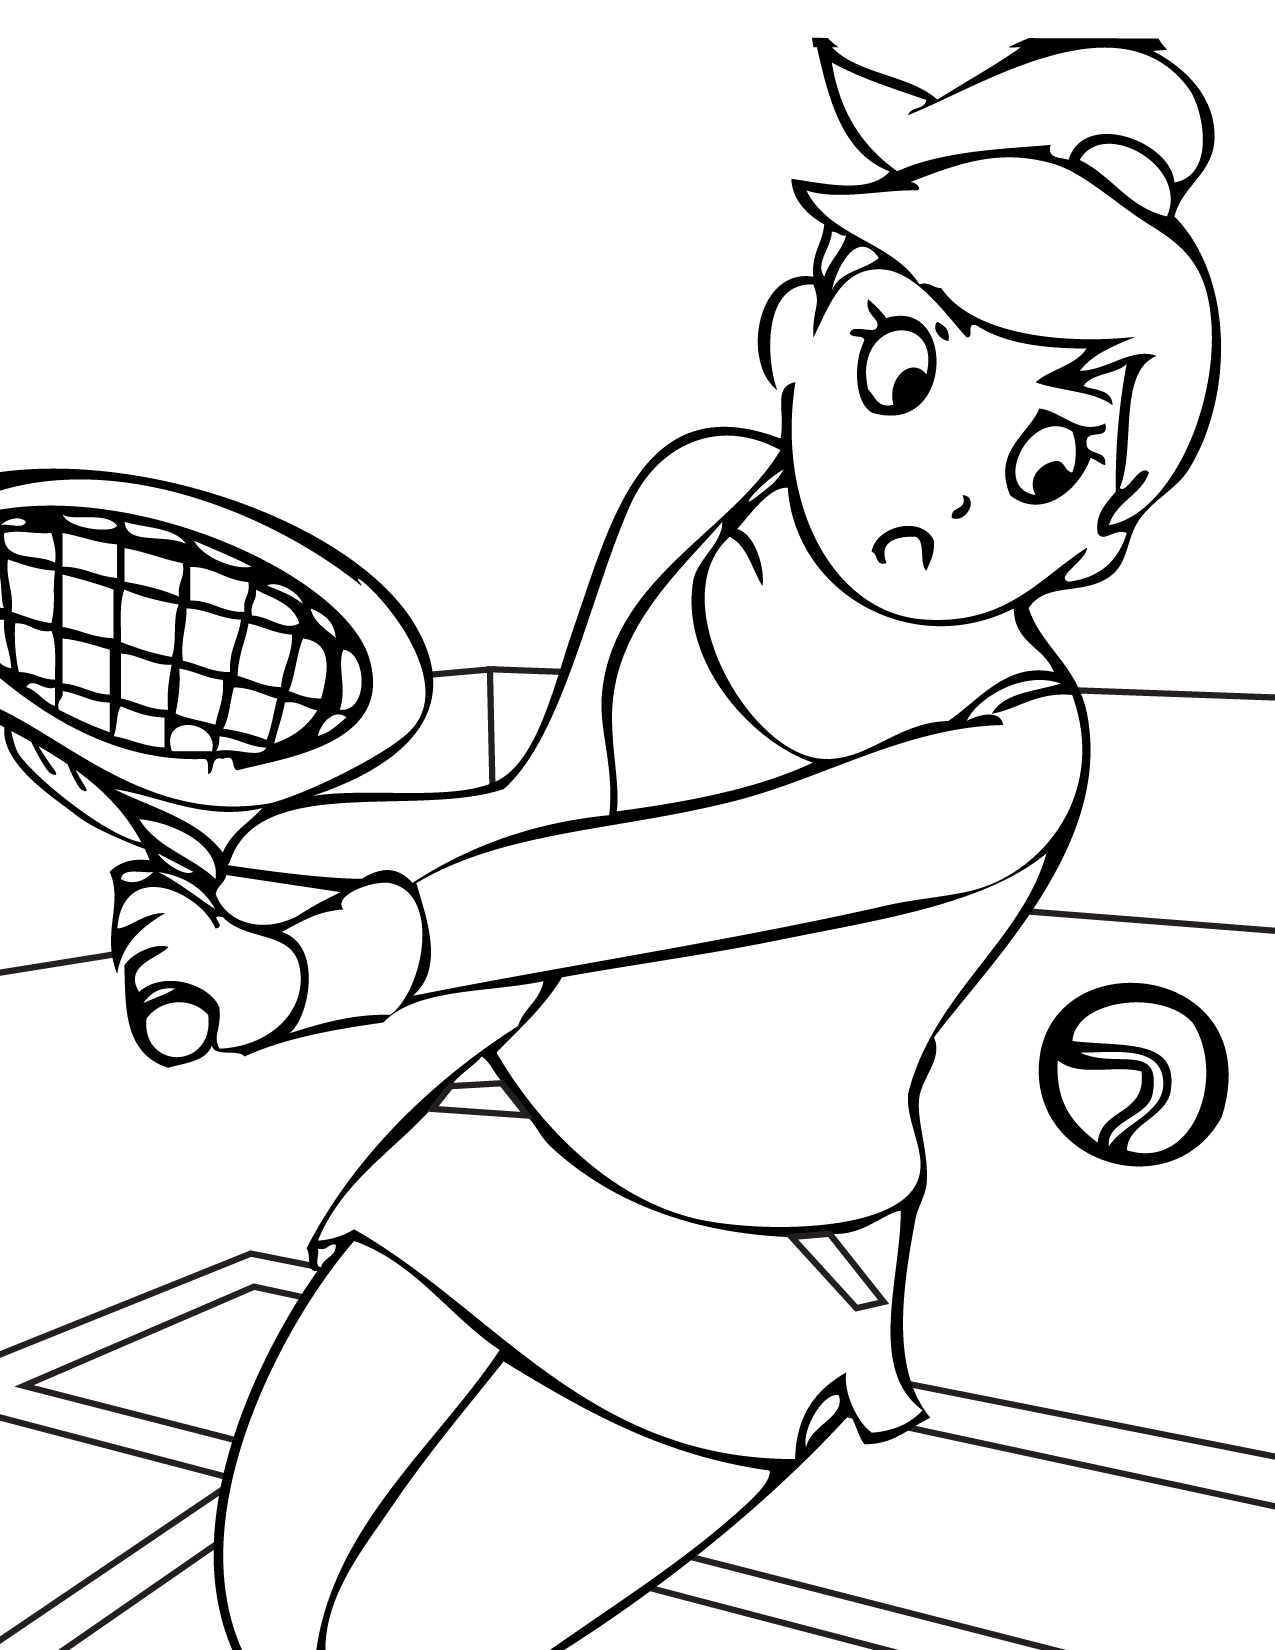  Tennis Sports Coloring pages for GIRLS